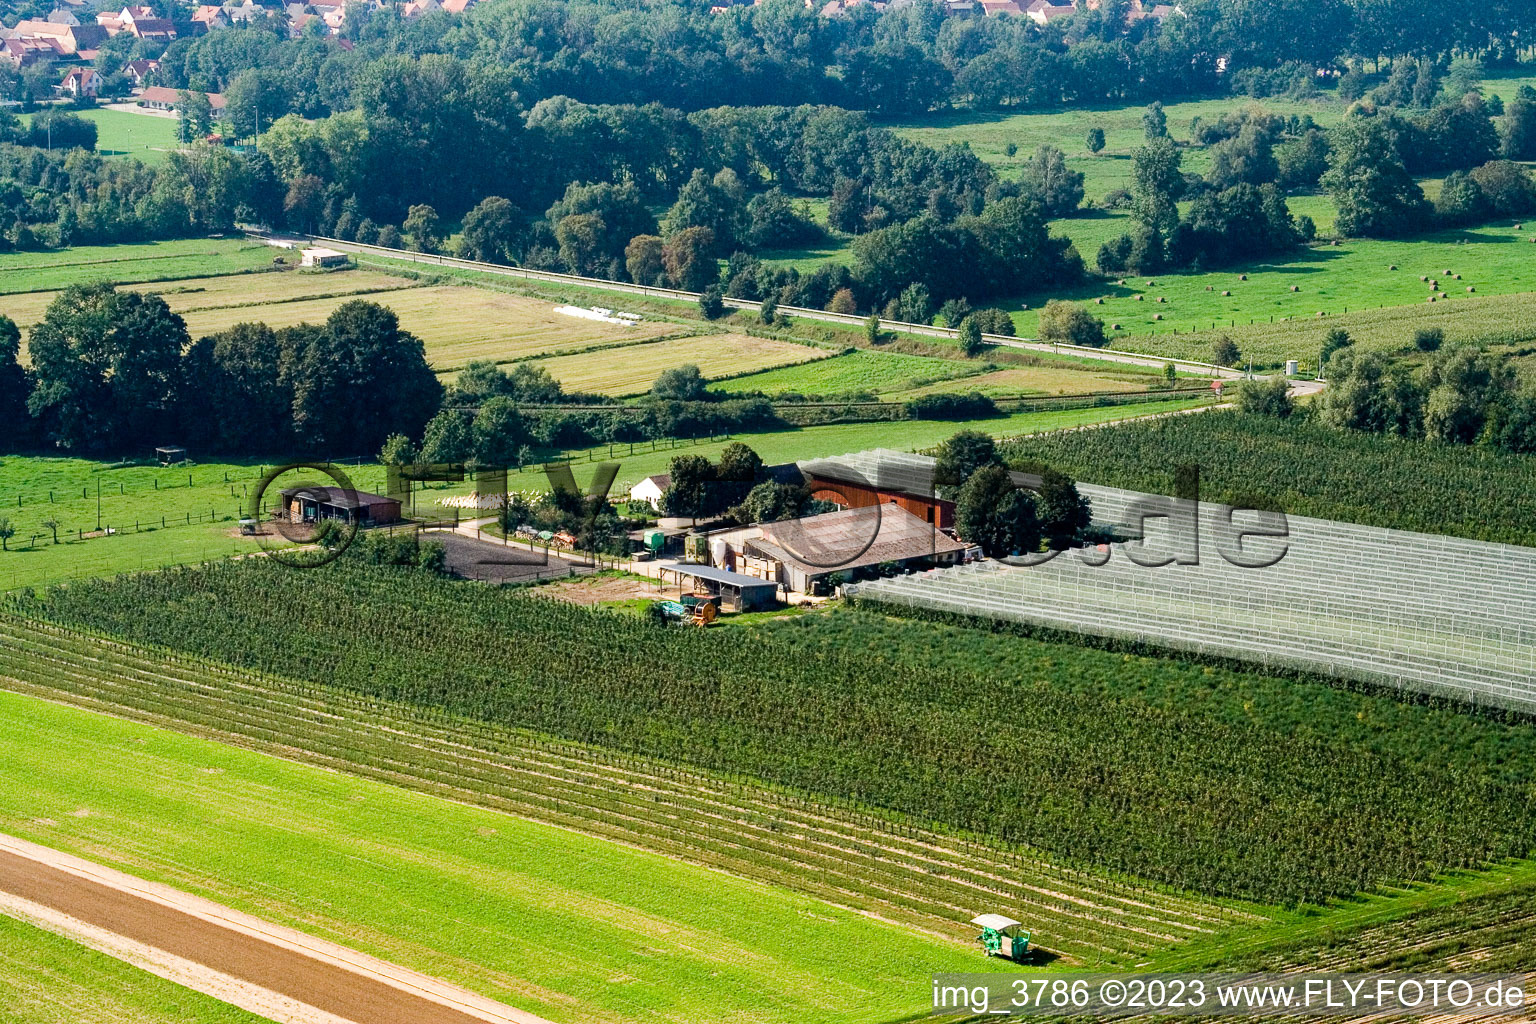 Lindenhof: Gensheimer fruit and asparagus farm in Steinweiler in the state Rhineland-Palatinate, Germany seen from above